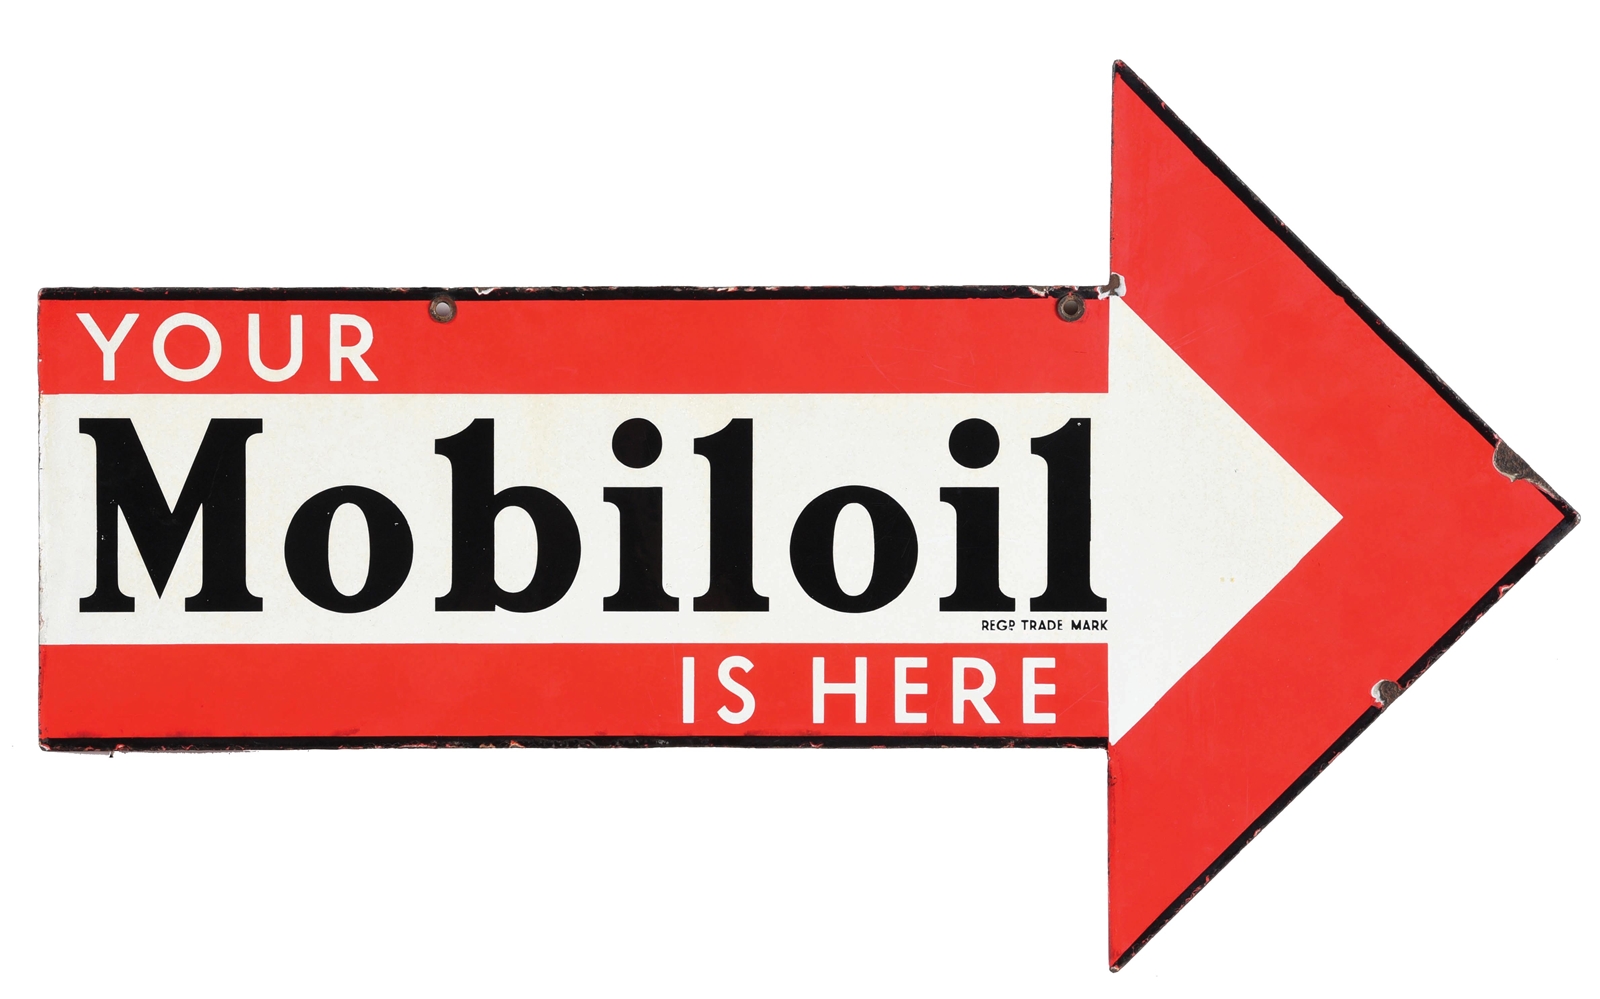 YOUR MOBILOIL IS HERE PORCELAIN SERVICE STATION ARROW SIGN. 